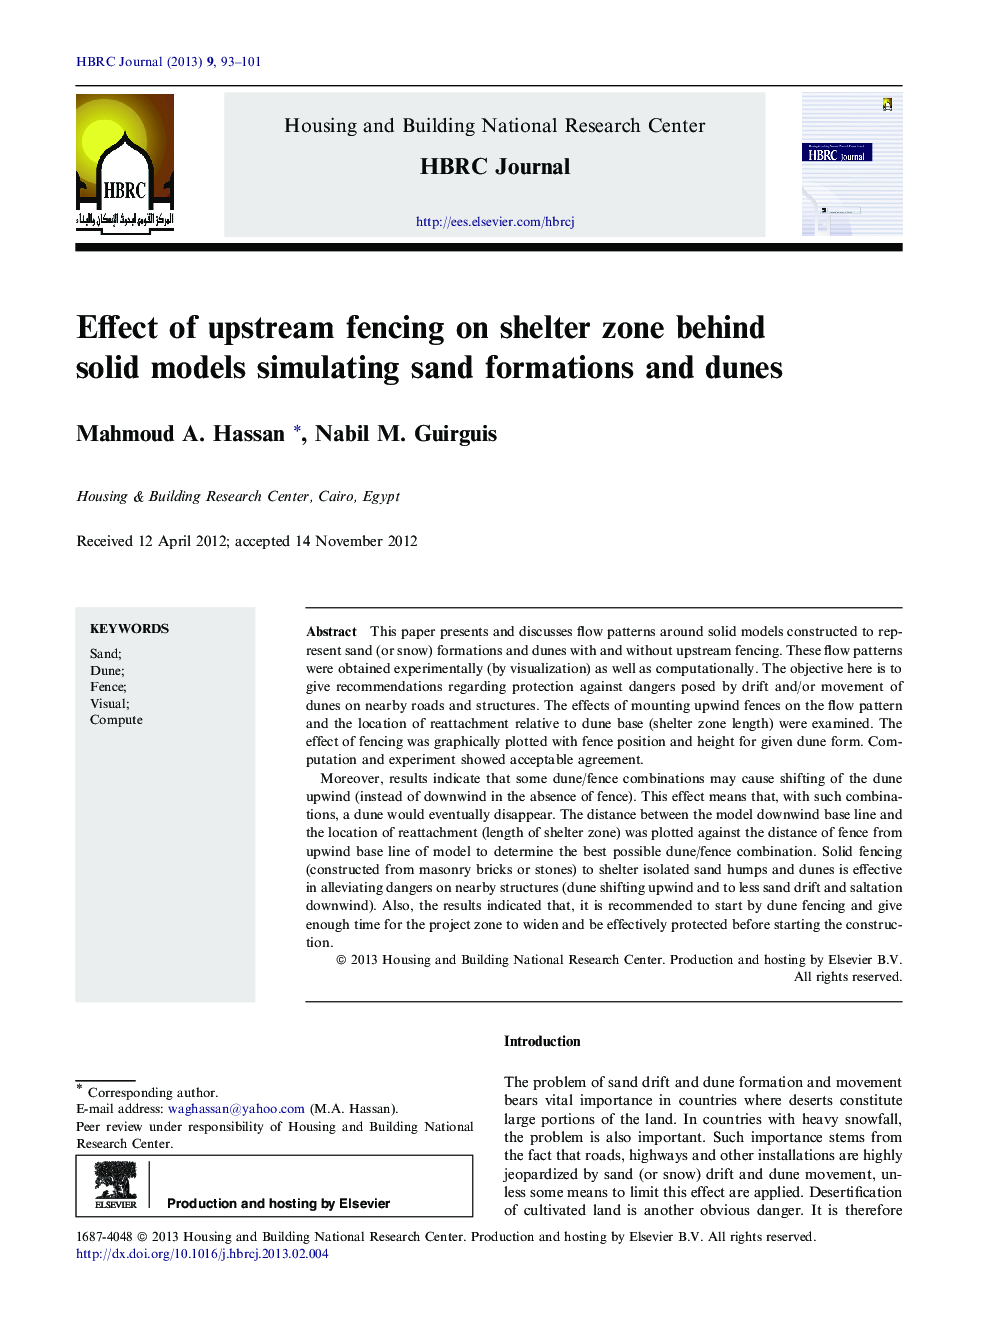 Effect of upstream fencing on shelter zone behind solid models simulating sand formations and dunes 